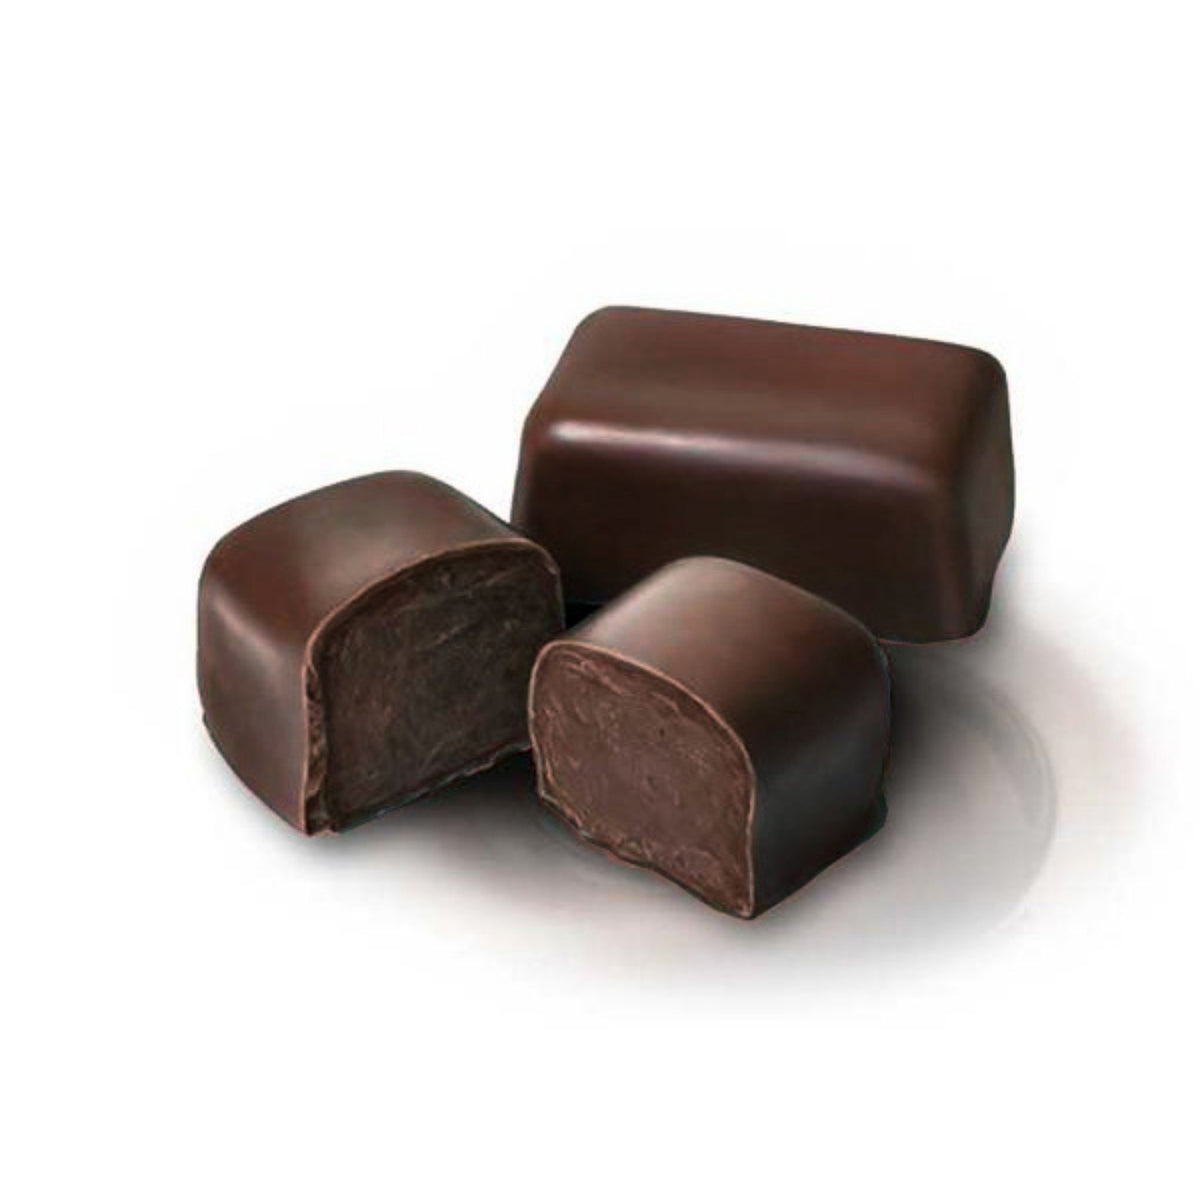 Dark Chocolate TruffleCremes, Made with a Dark Chocolate Ganache Center and Coated in an Outer Shell of Additional Dark Chocolate